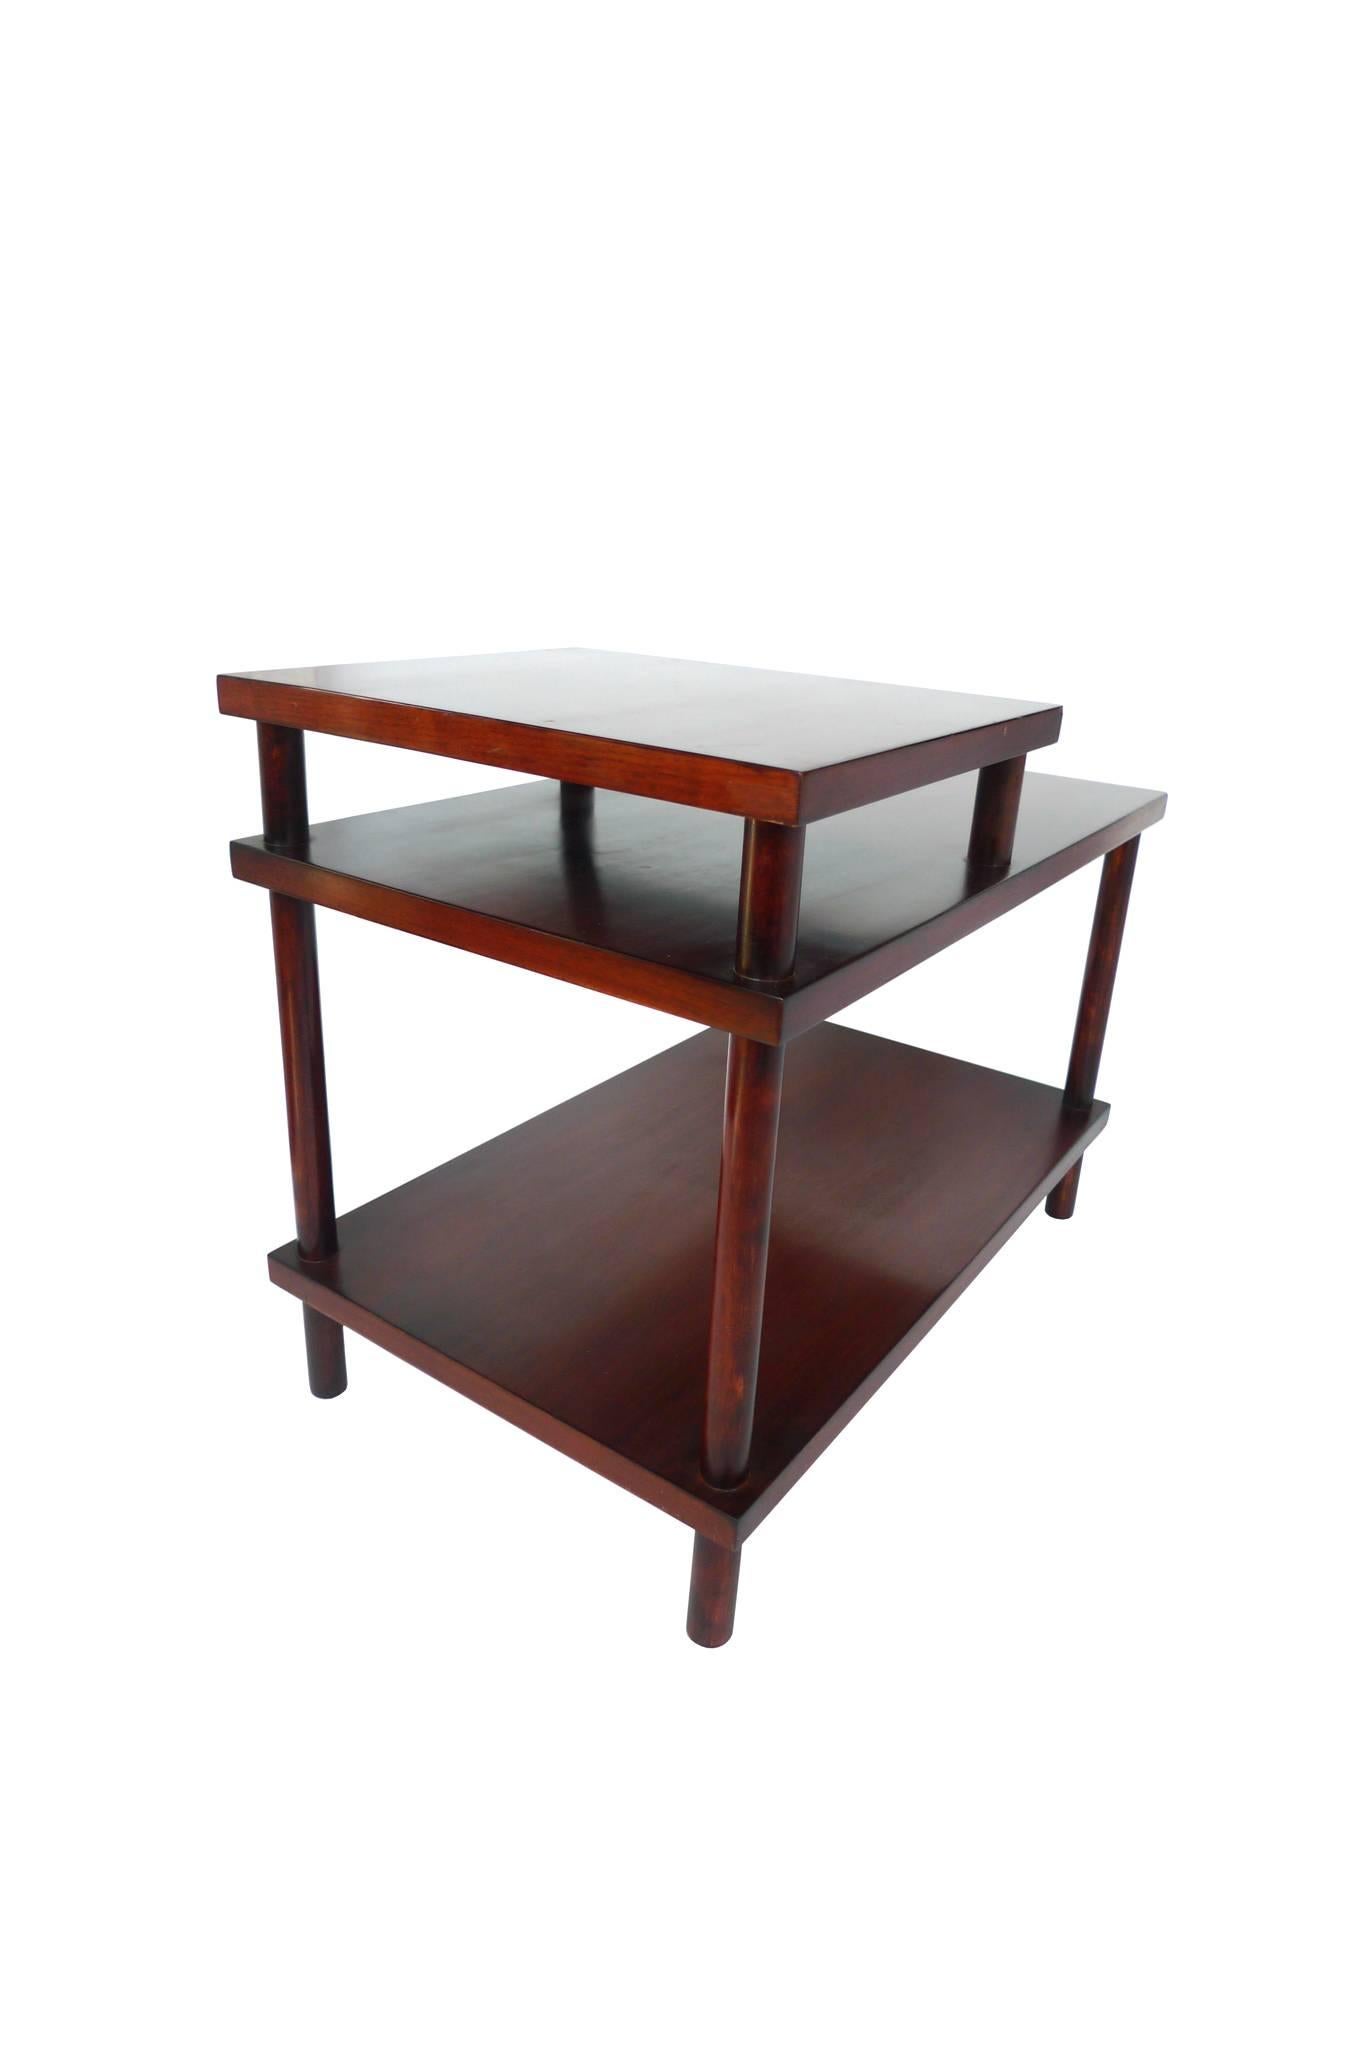 Mid-Century Modern Three-Tiered Side Table by T.H. Robsjohn-Gibbings for Widdicomb